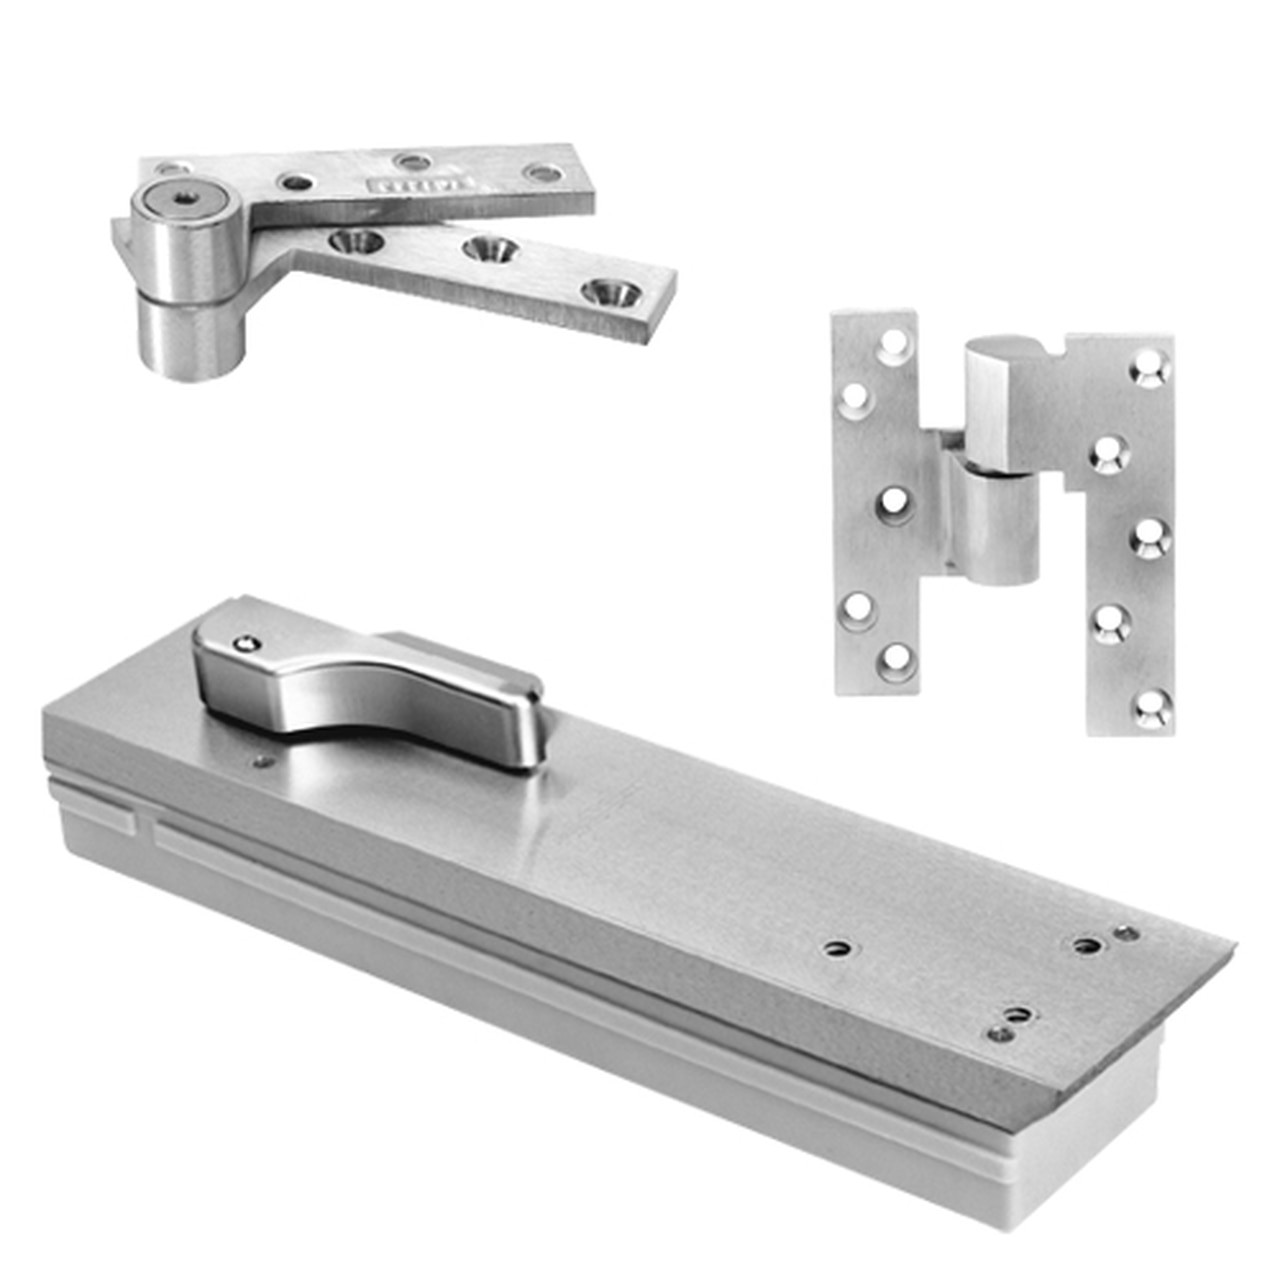 FQ5105NBC-SC-LH-625 Rixson Q51 Series Fire Rated 3/4" Offset Hung Shallow Depth Floor Closers in Bright Chrome Finish